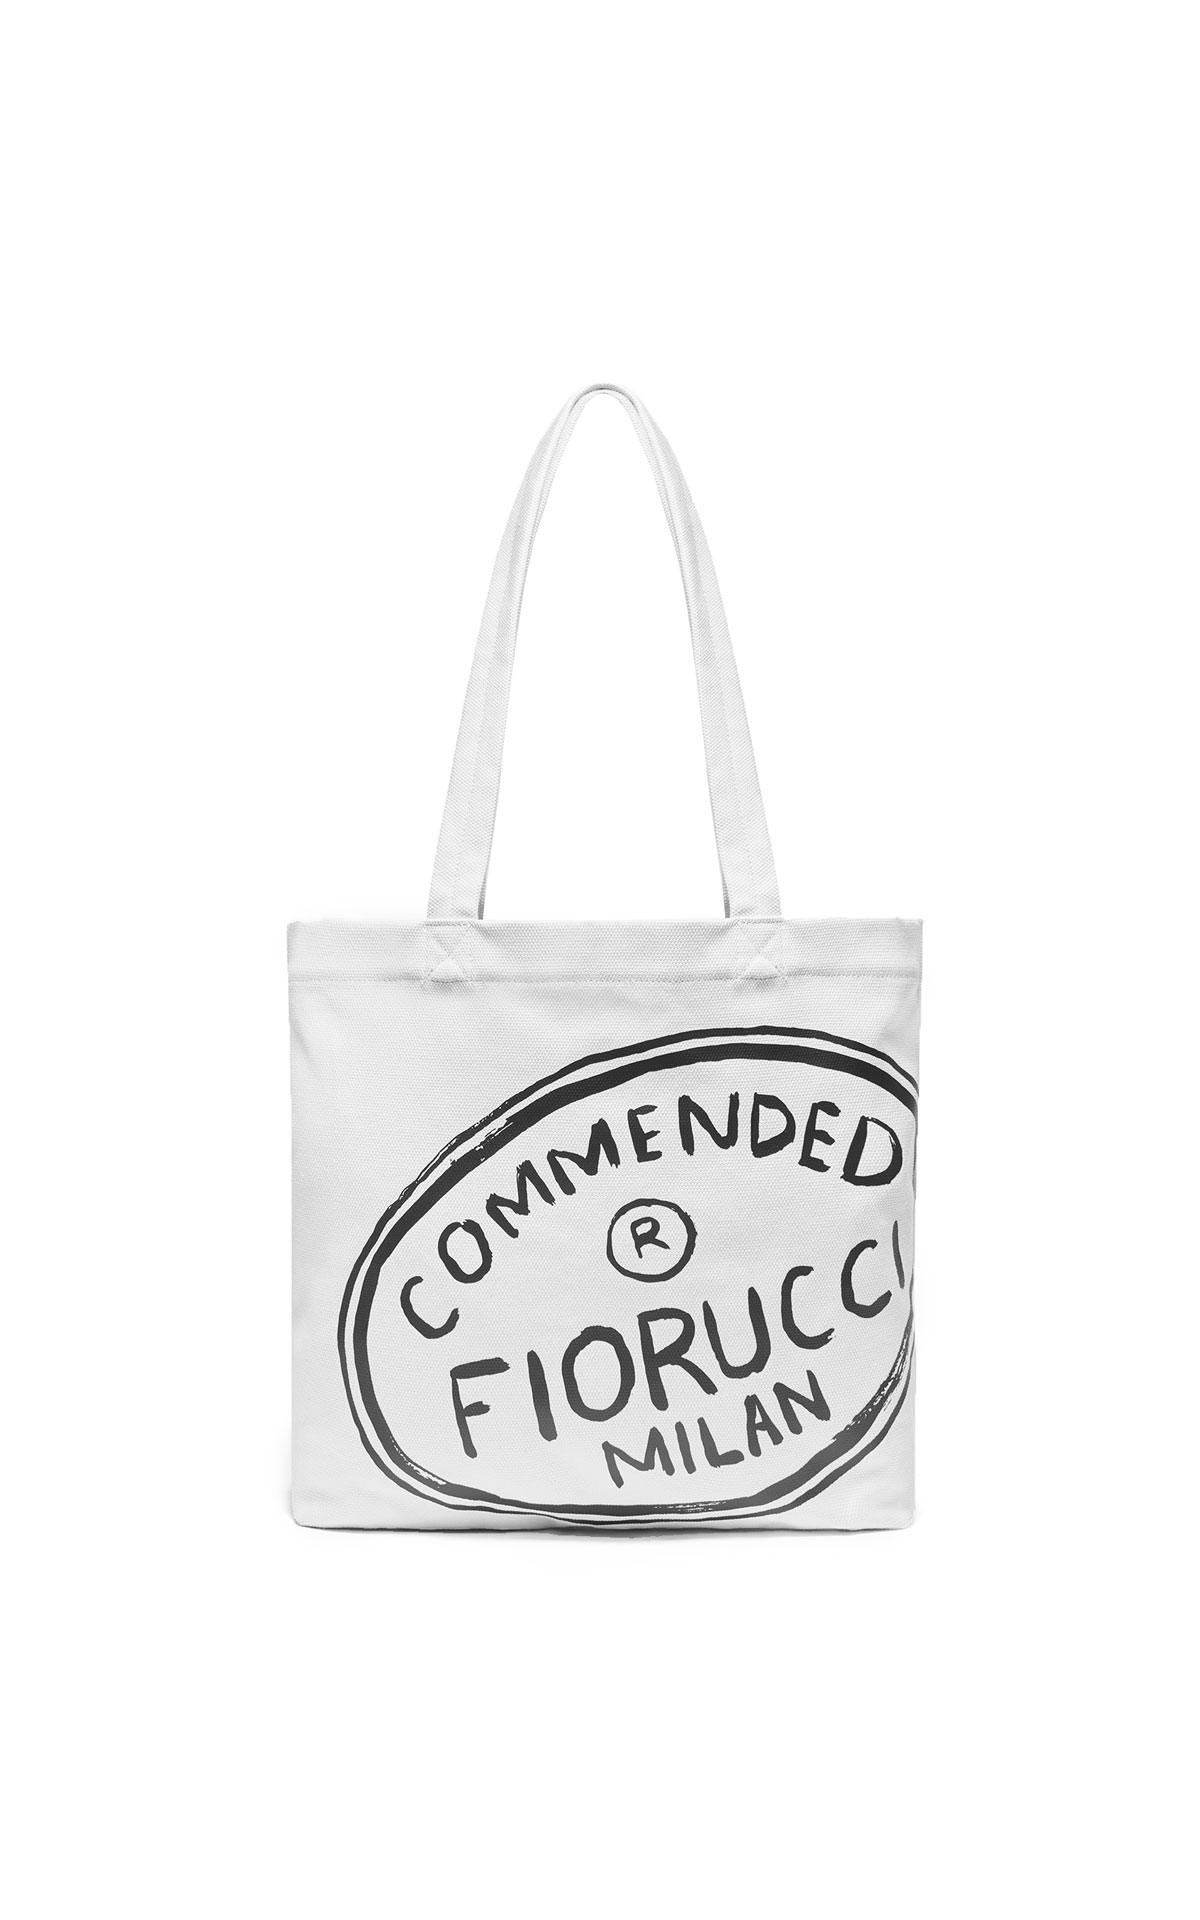 Fiorucci Illustrated commended tote bag white from Bicester Village